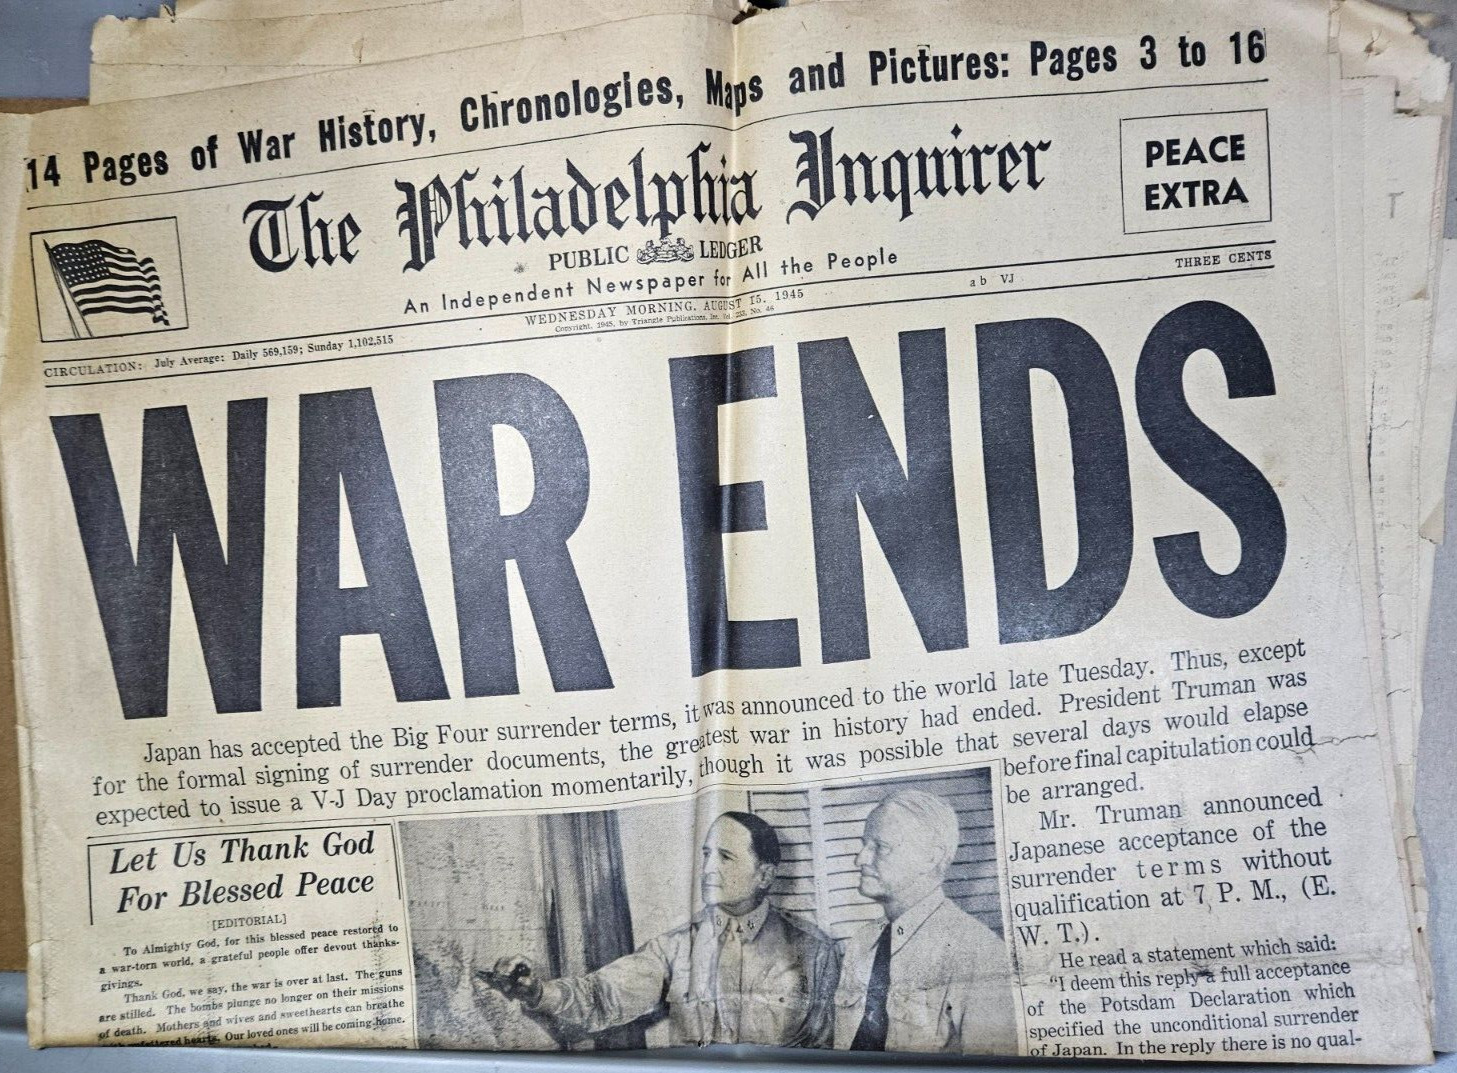 Philadelphia Inquirer HEADLINES from AUGUST 15th 1945 WAR ENDS